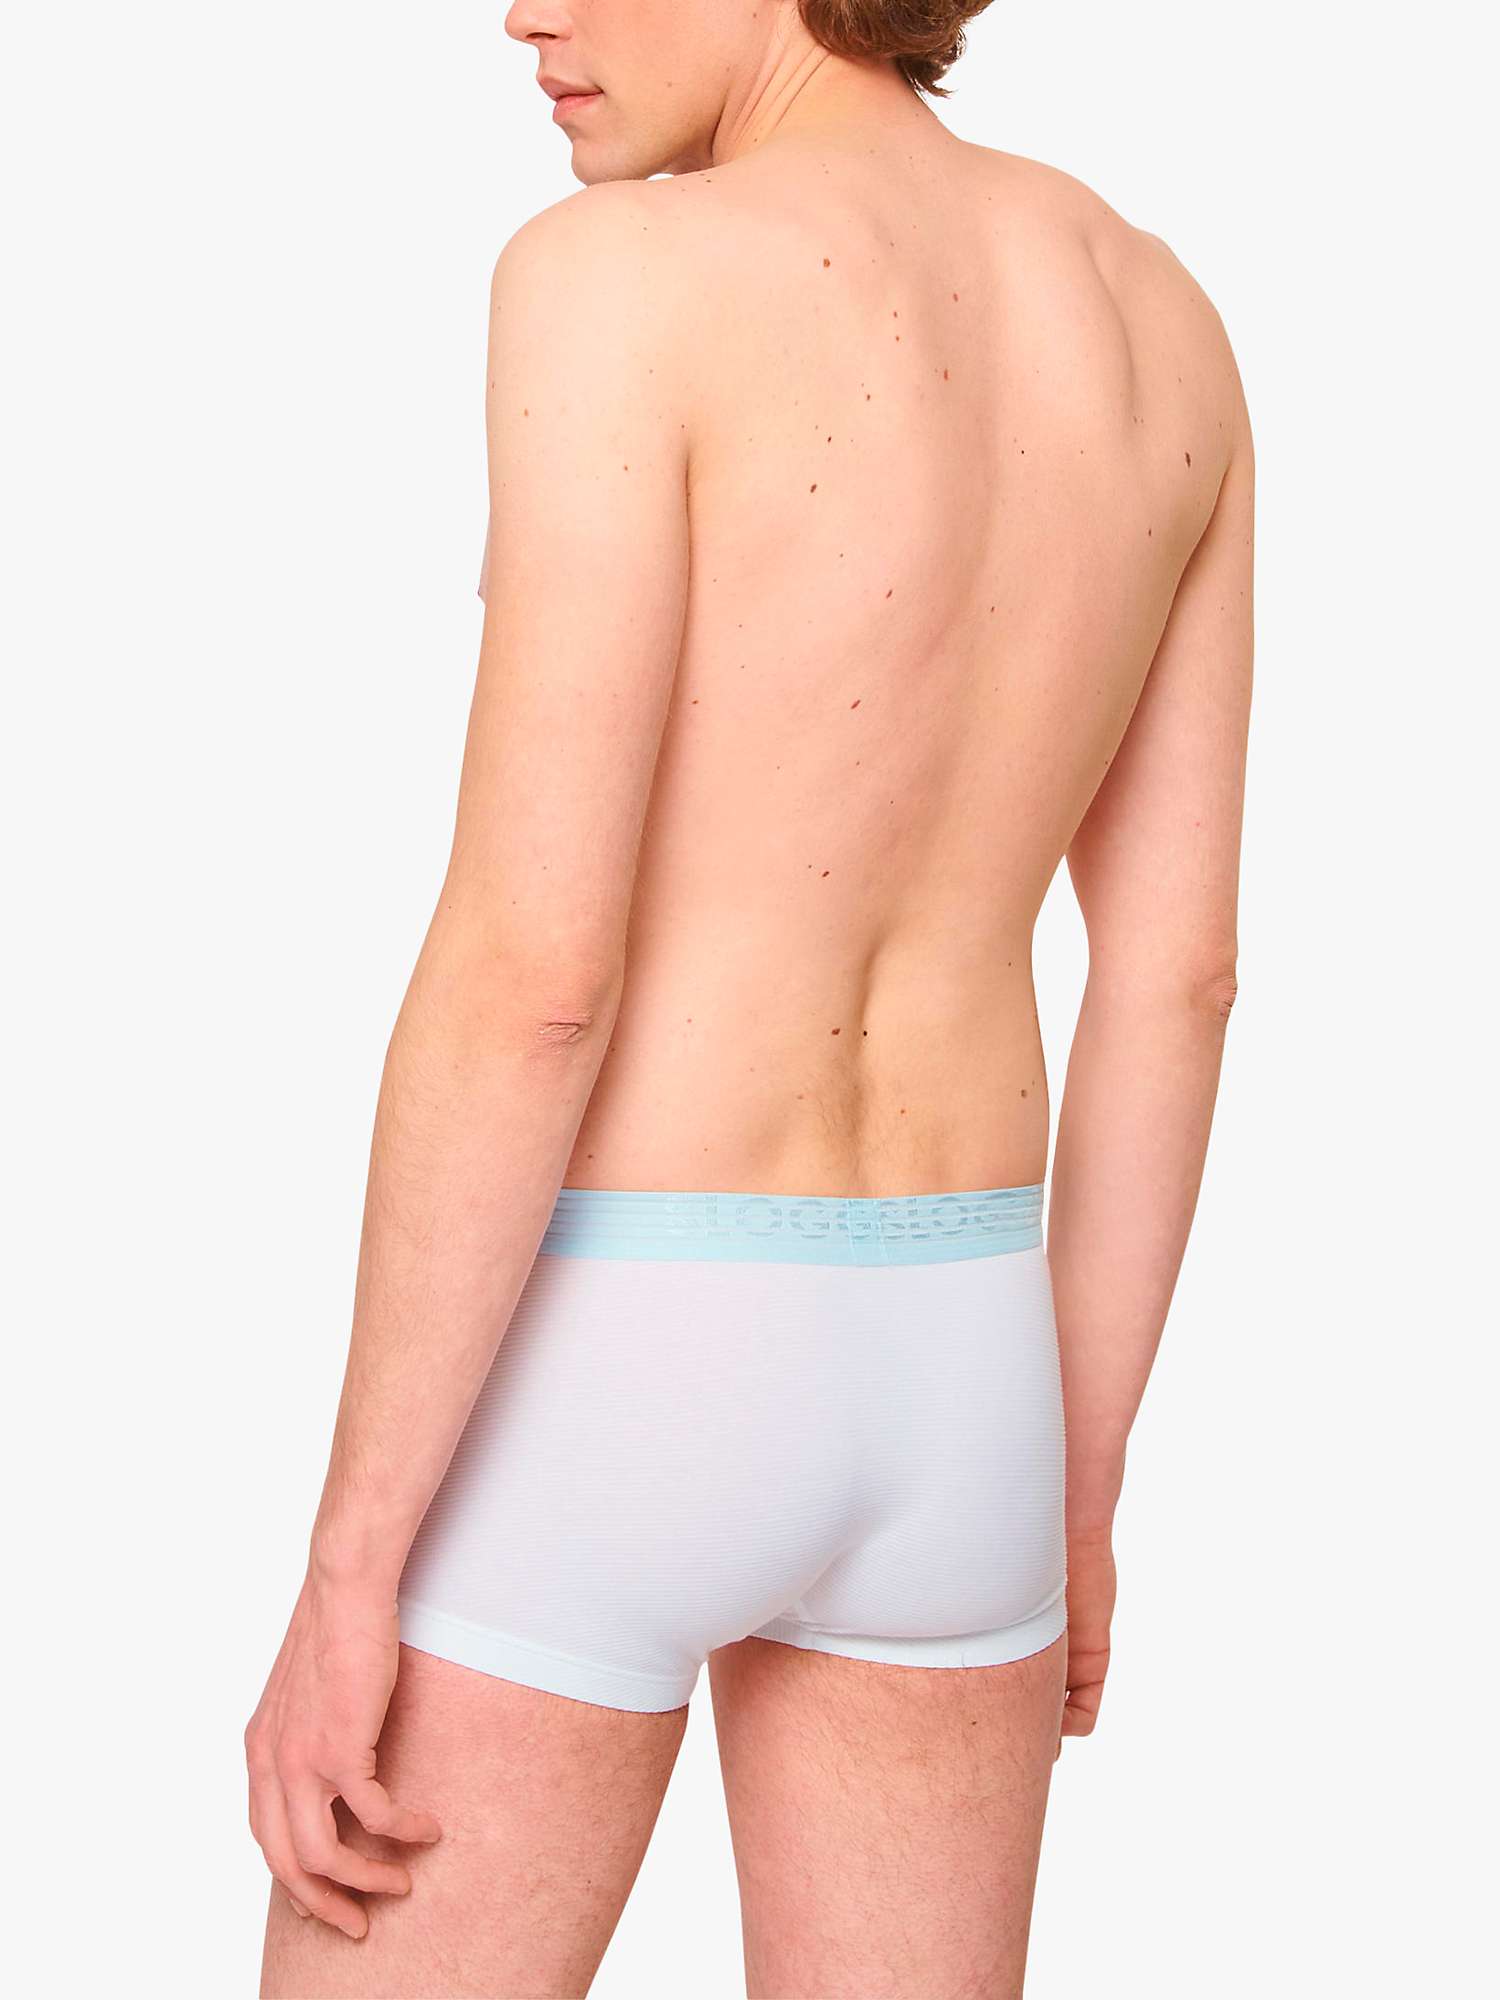 Buy sloggi EVER Cool Cotton Stretch Hipster Trunks, Pack of 2, White Online at johnlewis.com